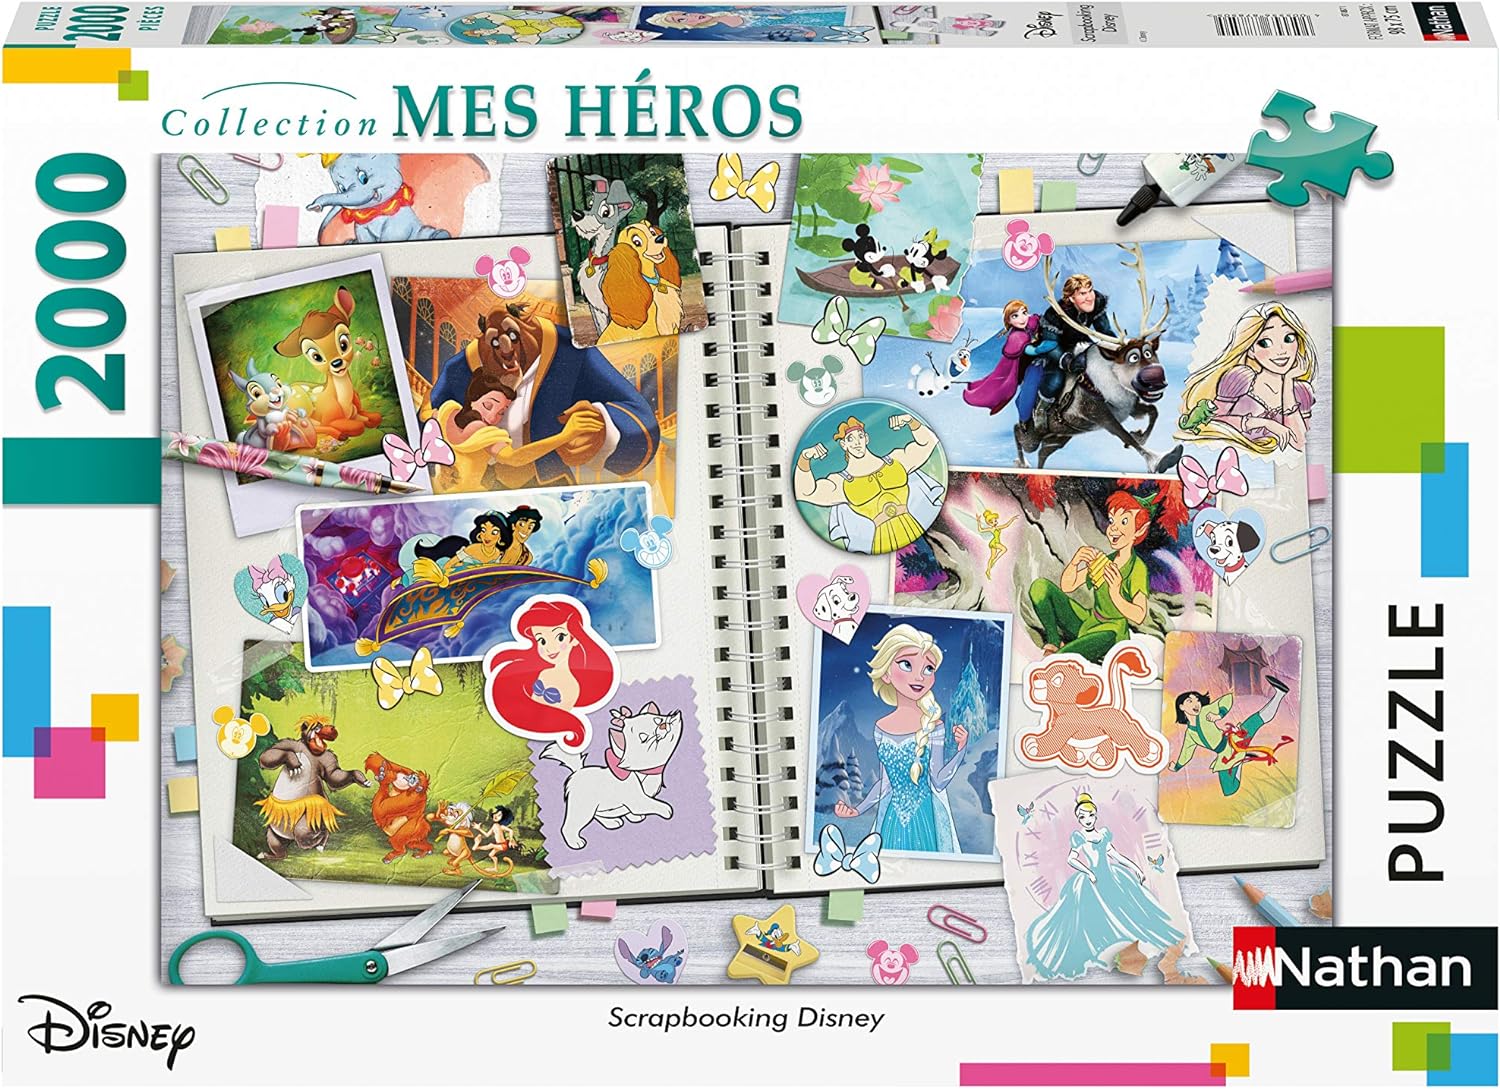 Nathan Collection Mes Heros Scrapbooking Disney  2000 Piece Puzzle